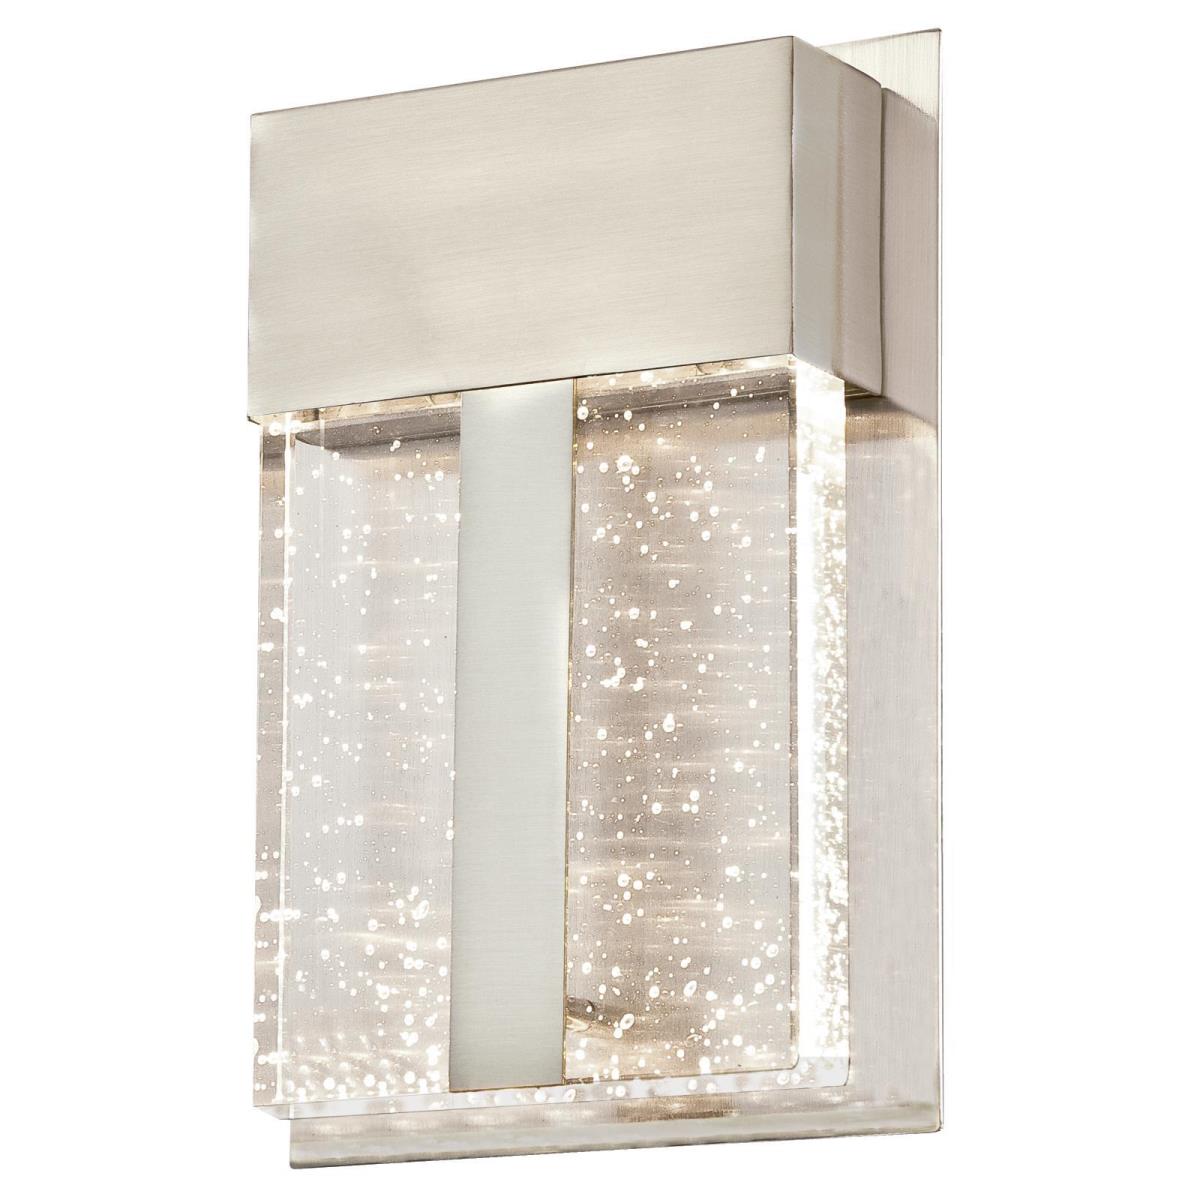 1 Light LED Wall Fixture Brushed Nickel Finish with Bubble Glass